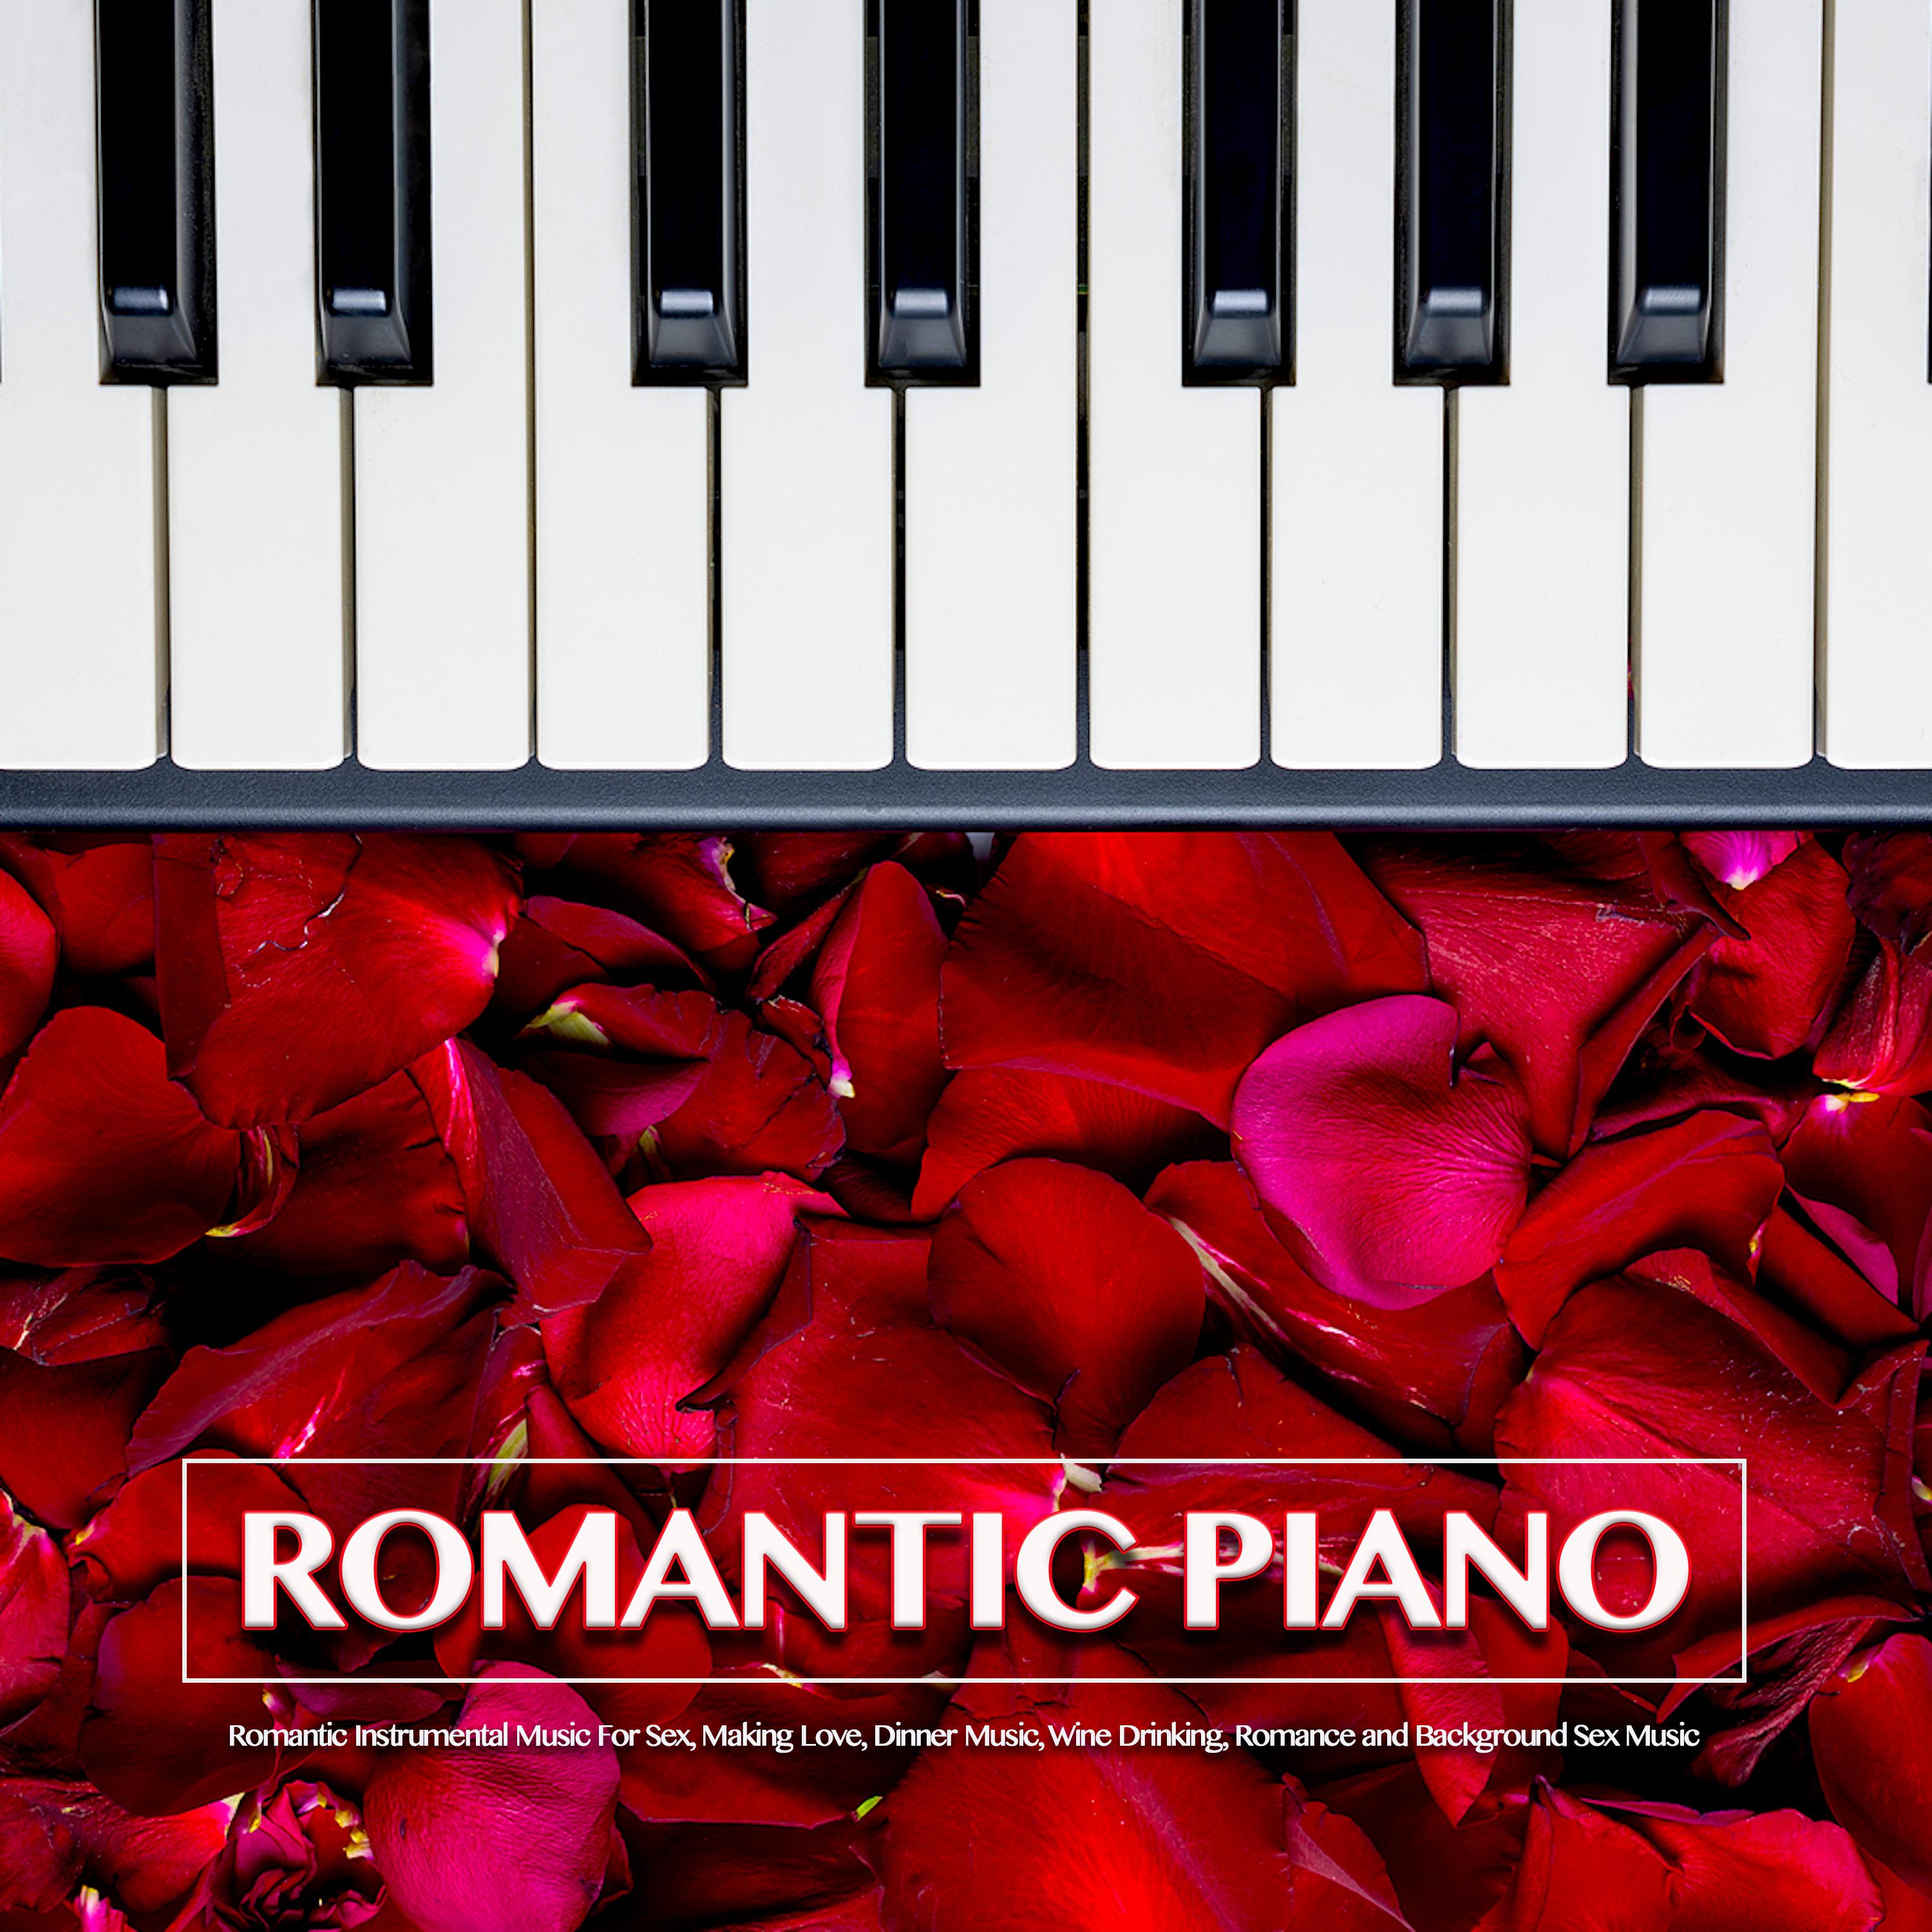 Romantic Piano: Romantic Instrumental Music For ***, Making Love, Dinner Music, Wine Drinking, Romance and Background *** Music